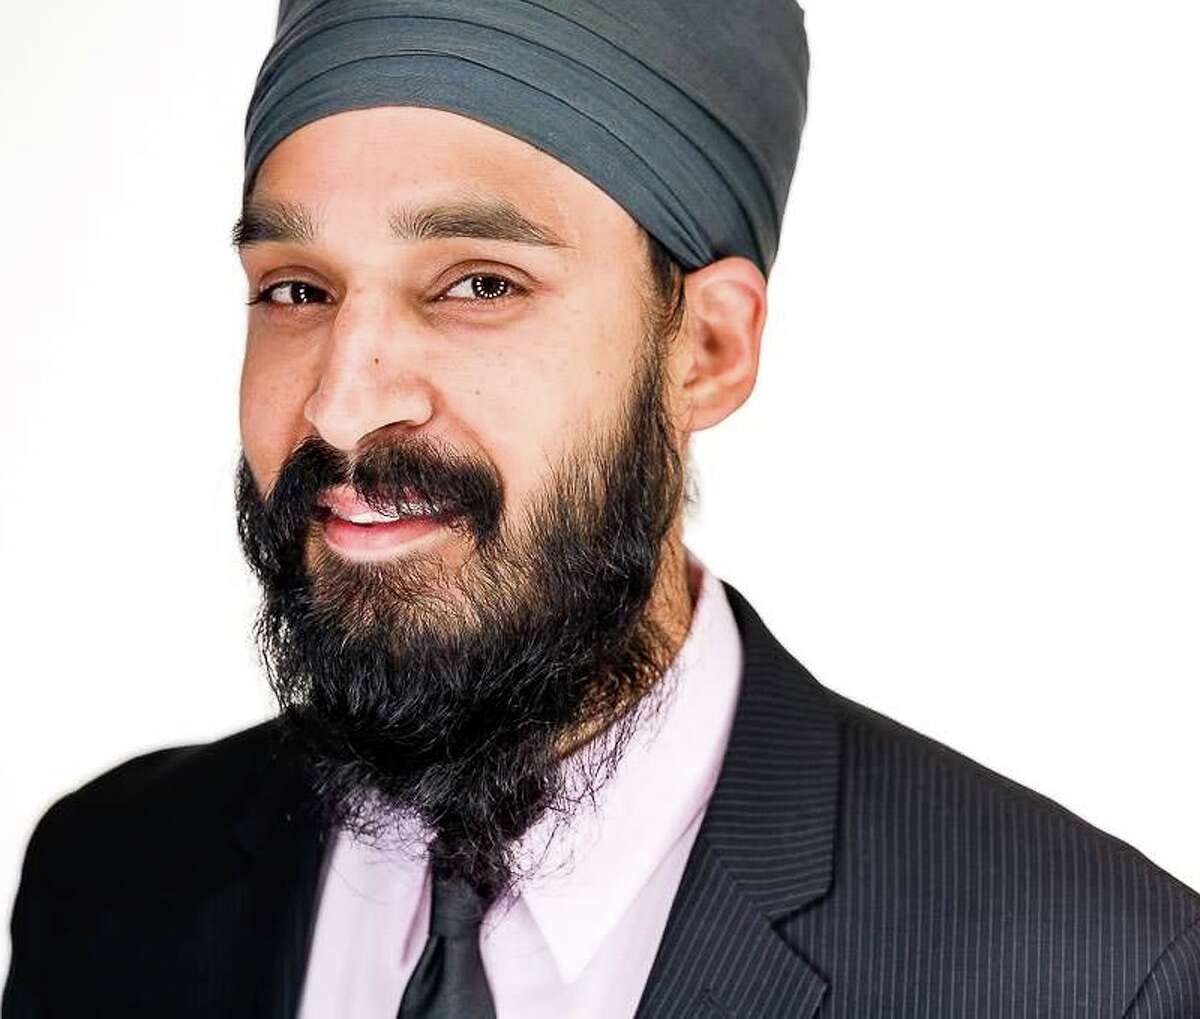 Simran Jeet Singh, a Sikh assistant religion professor at Trinity University, penned a viral tweet on Tuesday describing his mom's reaction to the racism he receives online.